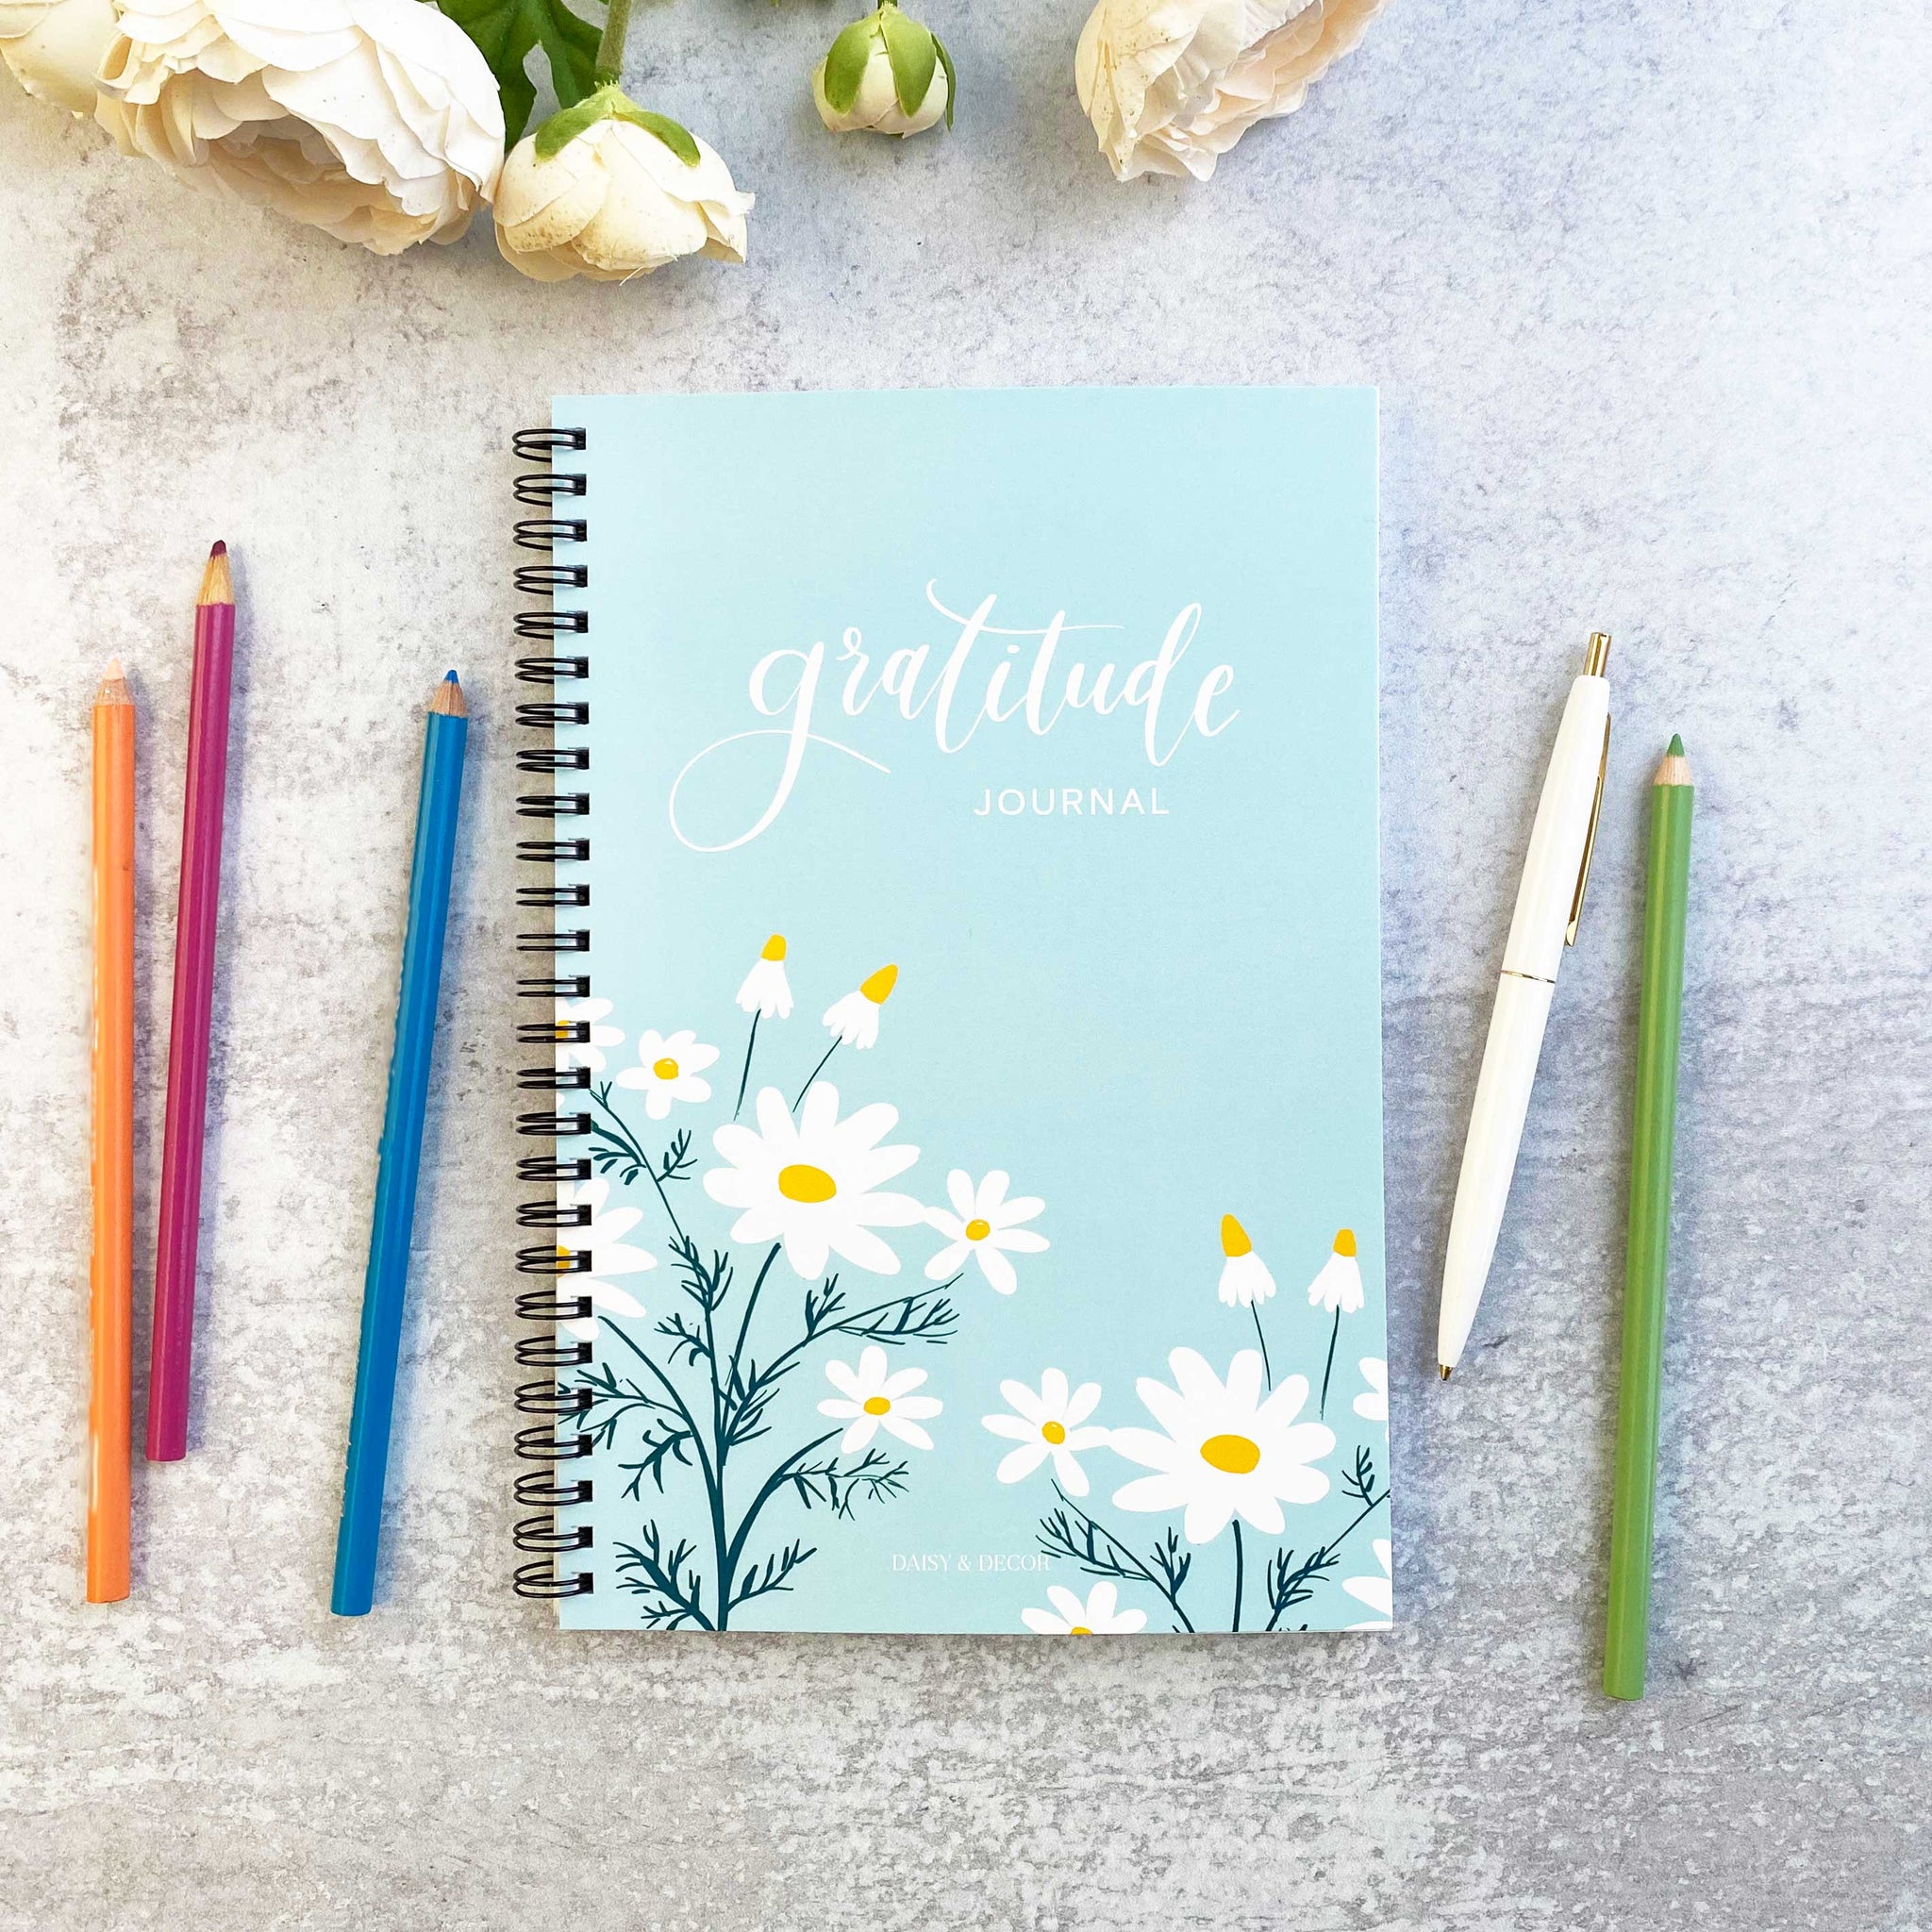 52 week undated Gratitude Journal - floral – Daisy and Decor